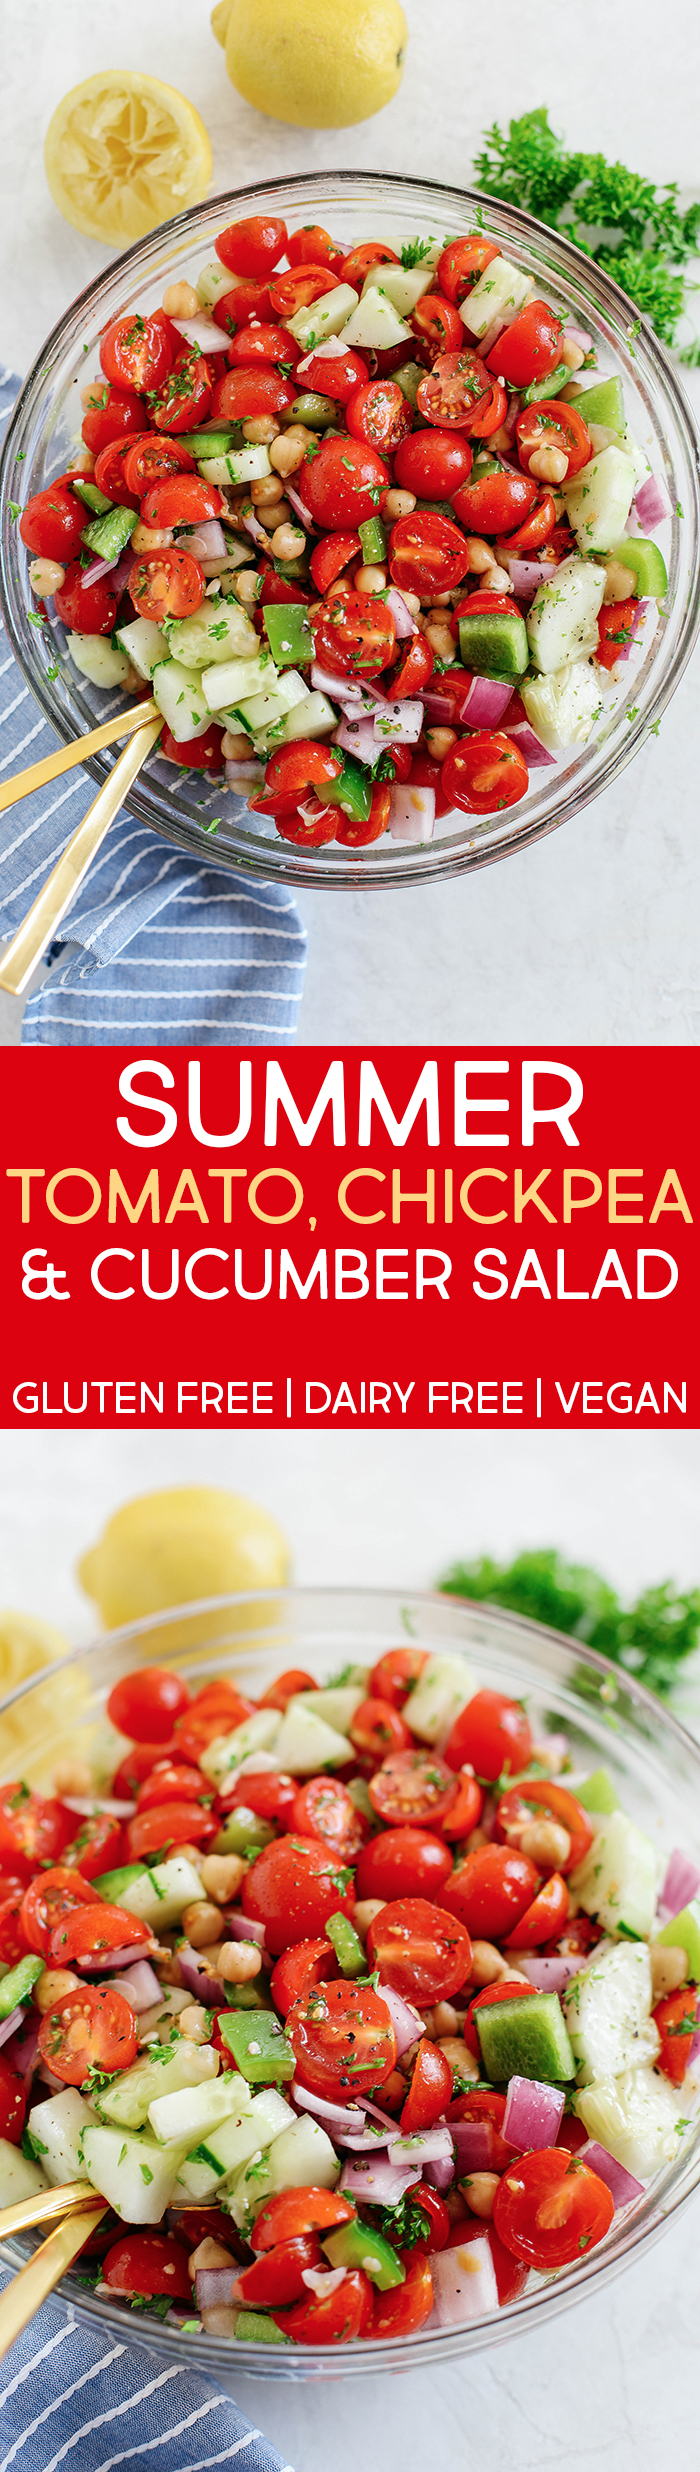 This Tomato, Cucumber and Chickpea Salad is a delicious summer staple that is quick, healthy and the perfect side dish with grilled chicken, fish or steak!